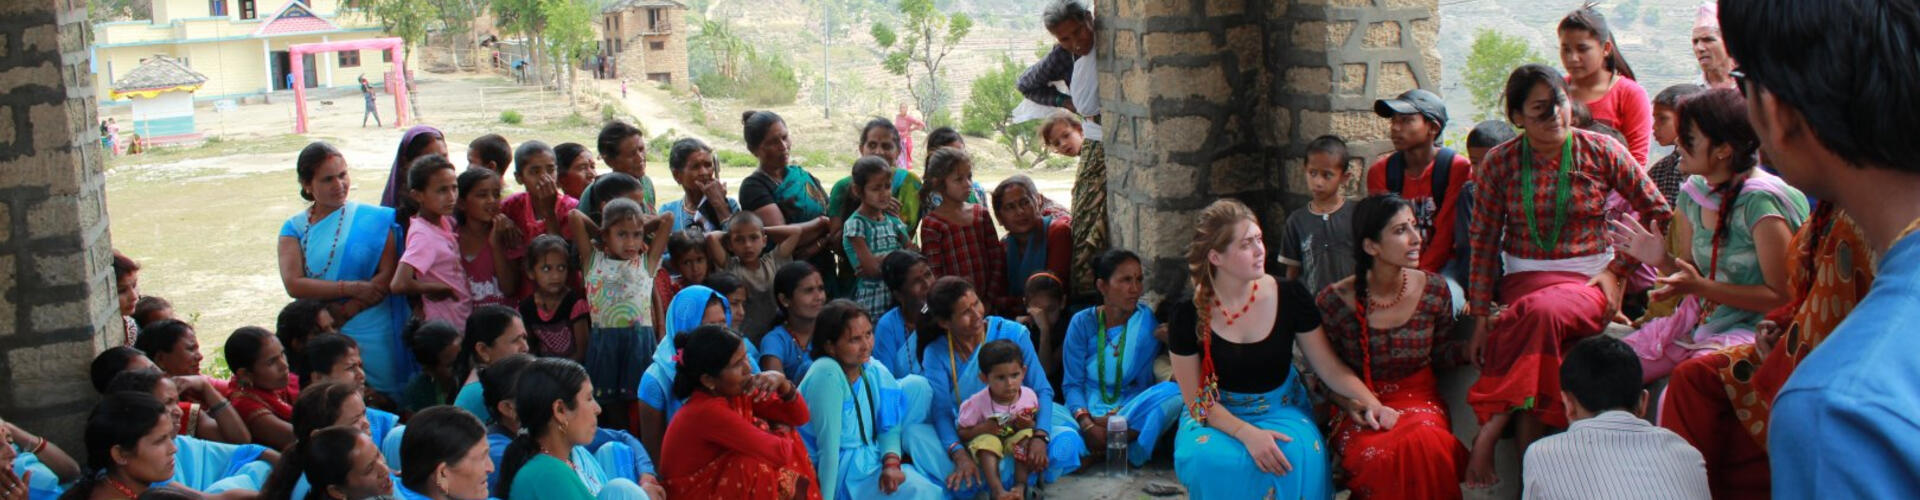 village health education meeting (from Google)